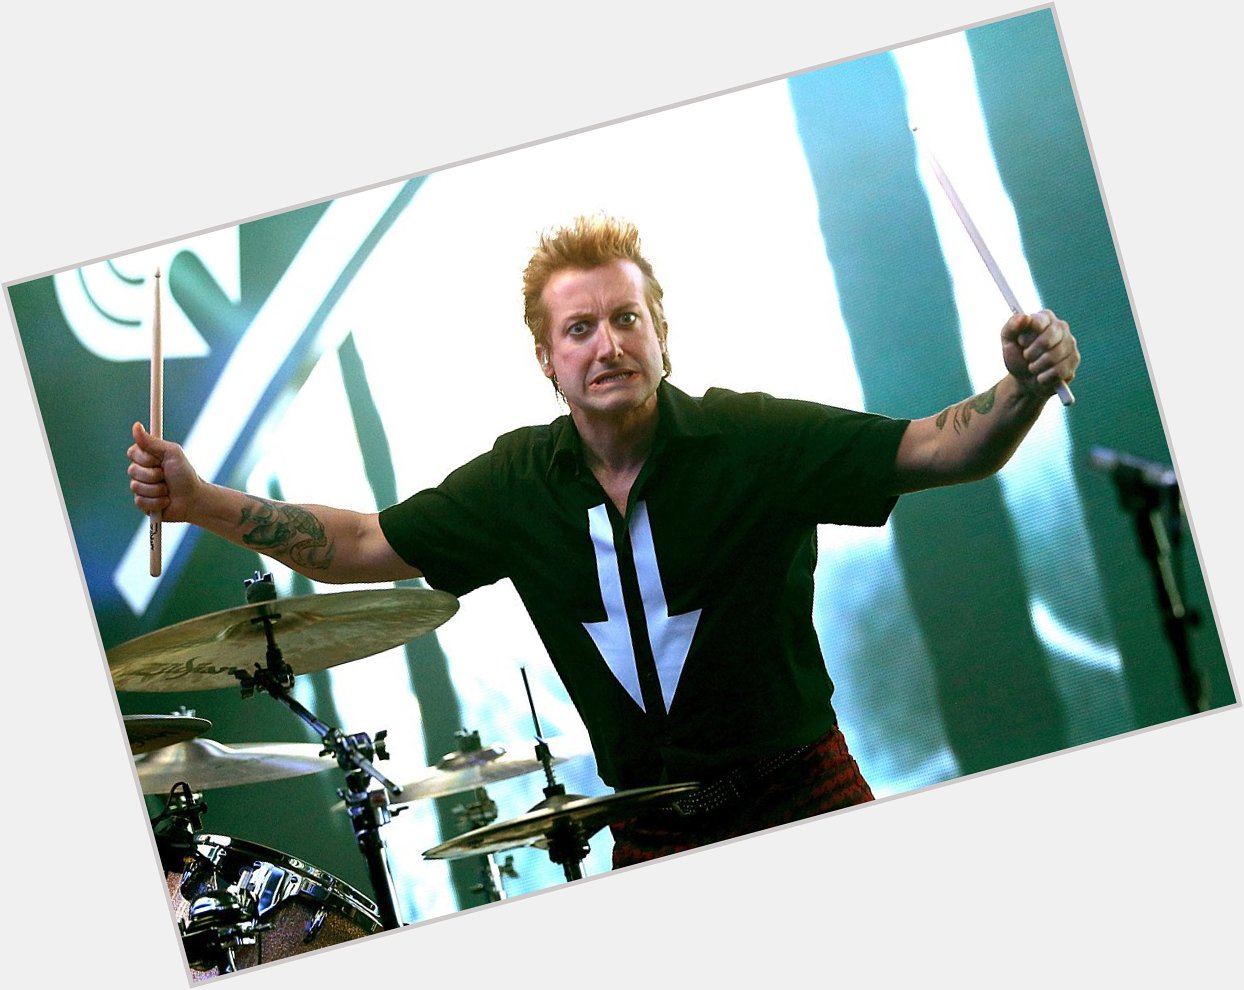 Happy 48th Birthday to Tré Cool! The drummer for Green Day. 